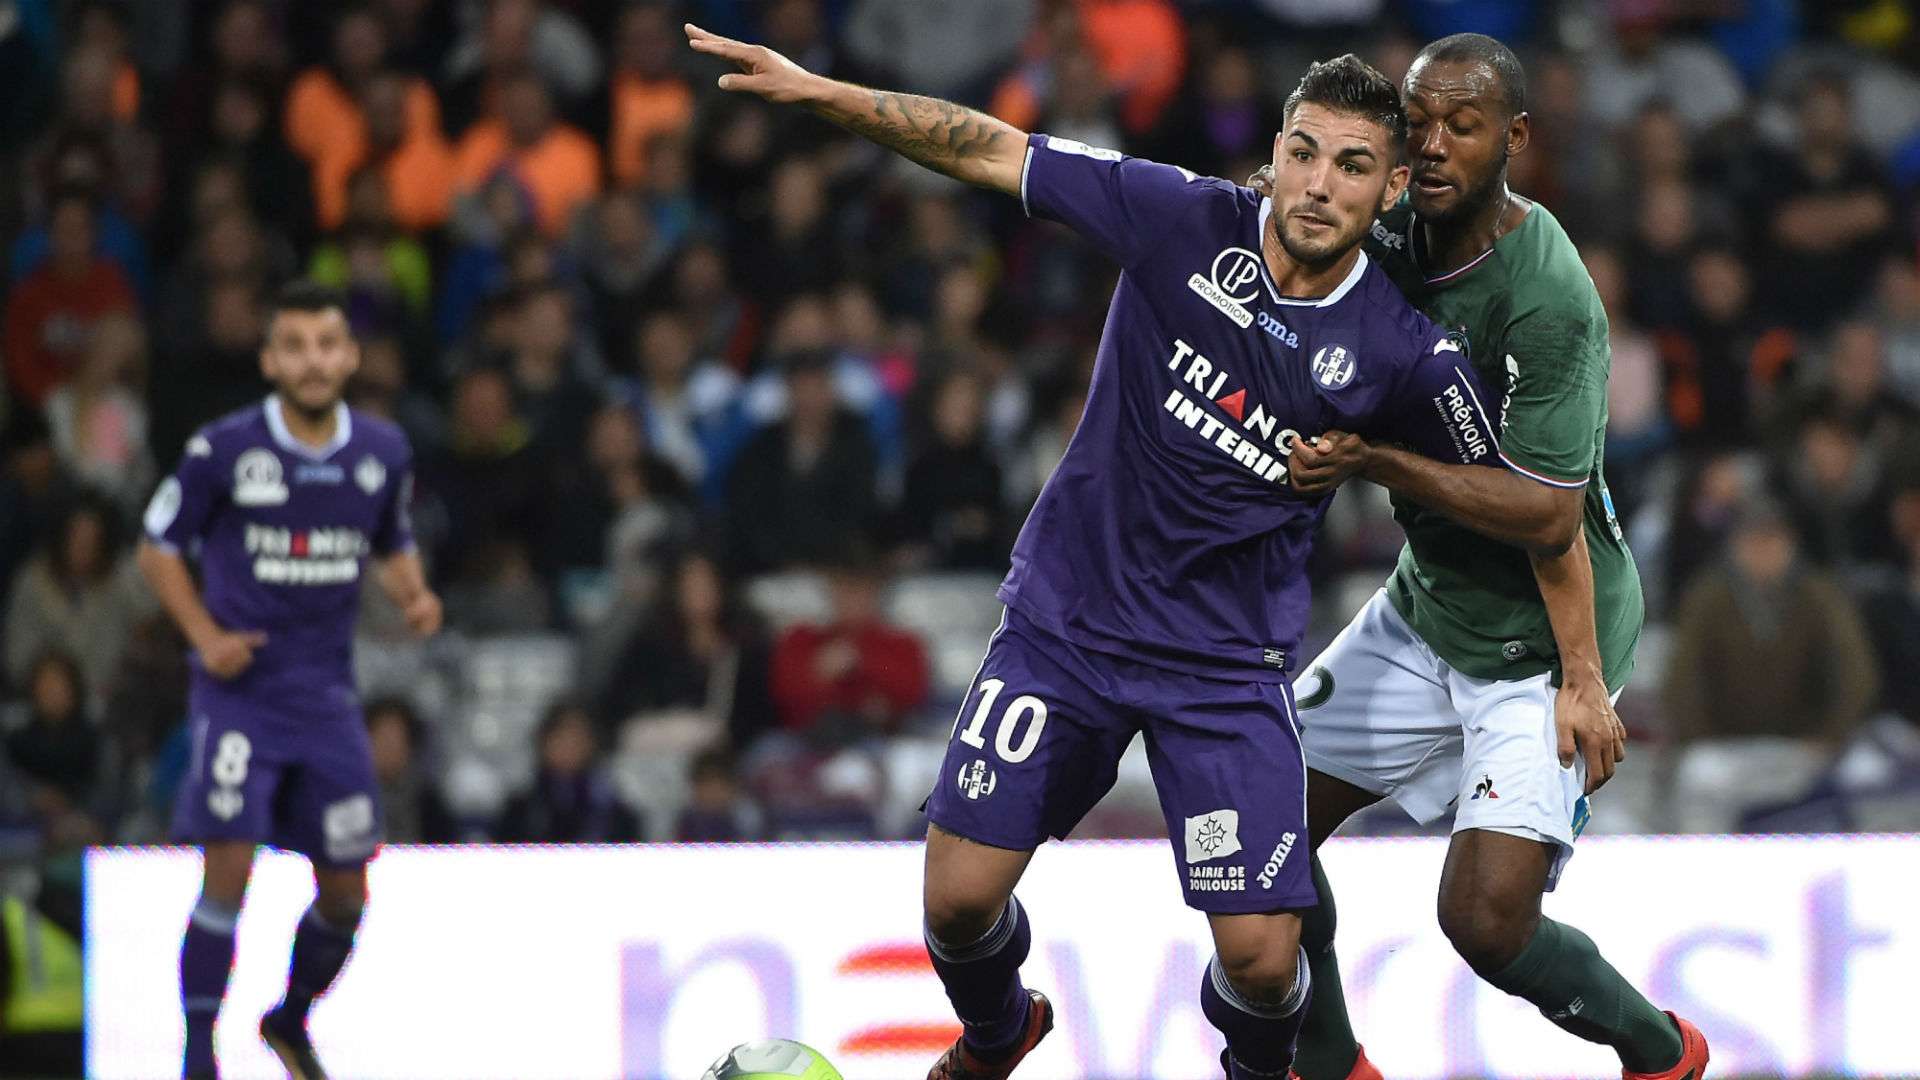 Kévin Theophile-Catherine Andy Delort Toulouse ASSE Ligue 1 29102017